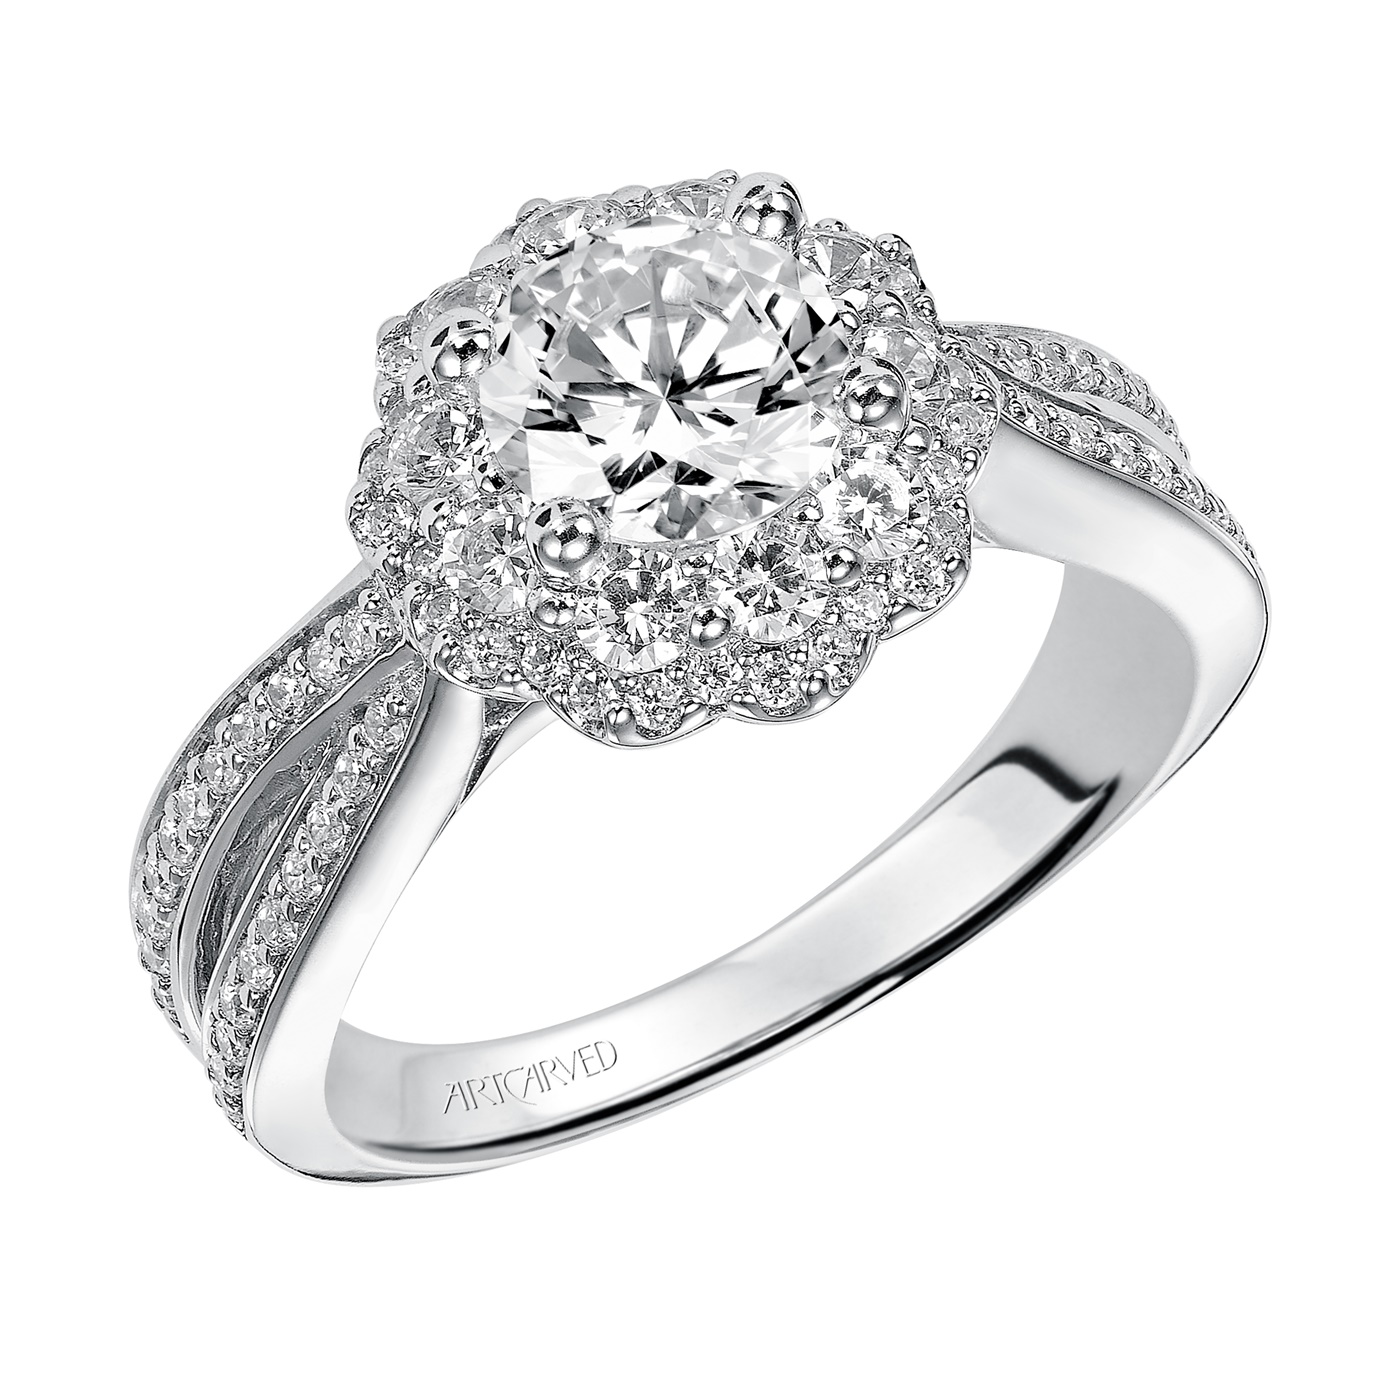 14kt White Gold Double Halo Diamond Engagement Ring by ArtCarved